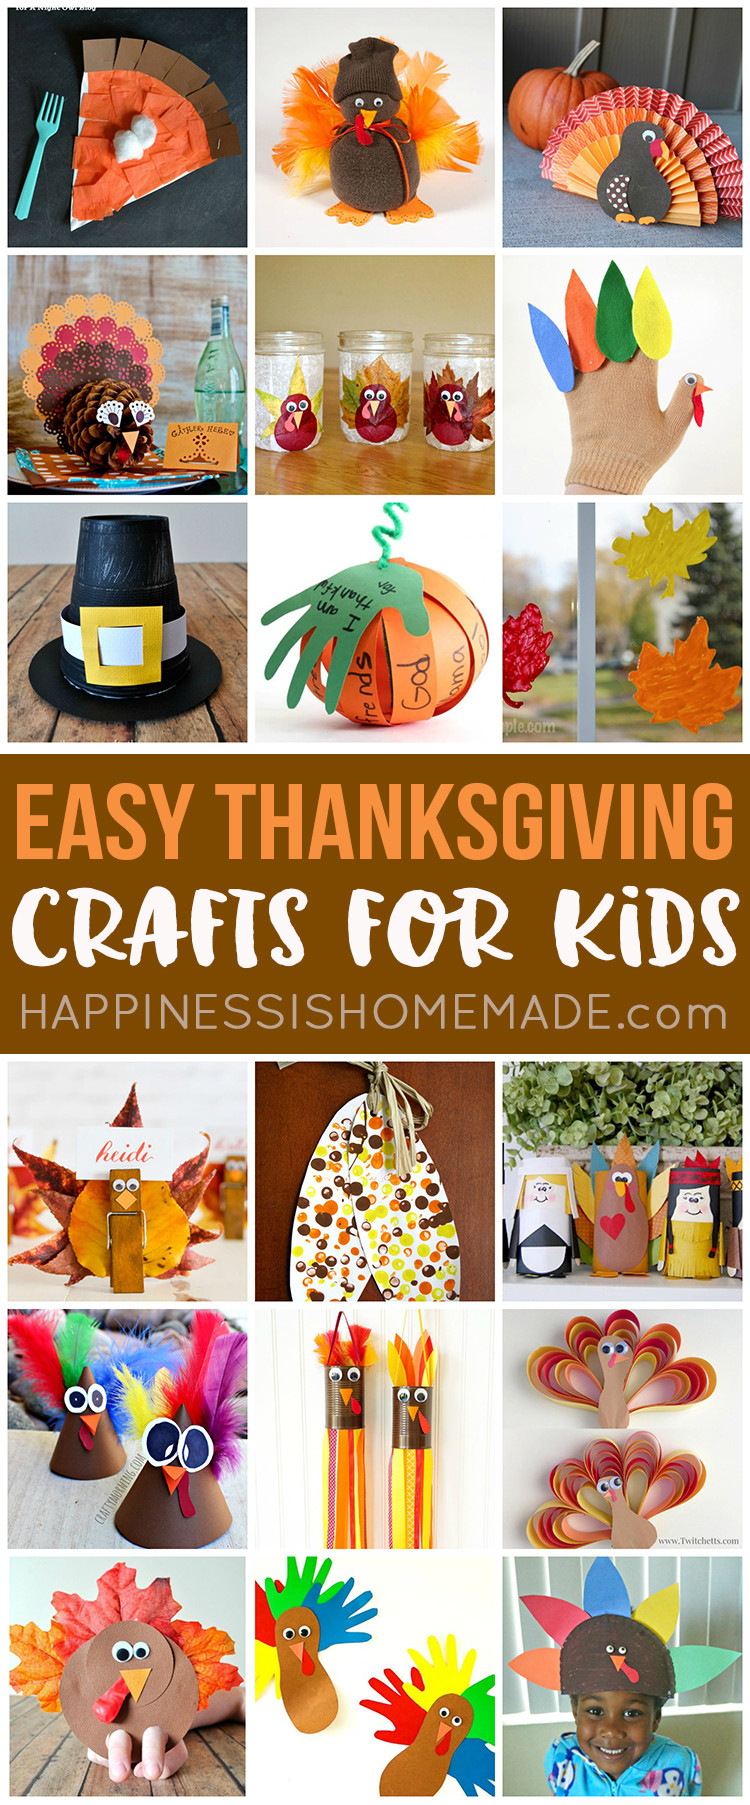 Quick Easy Crafts For Kids
 Easy Thanksgiving Crafts for Kids to Make Happiness is